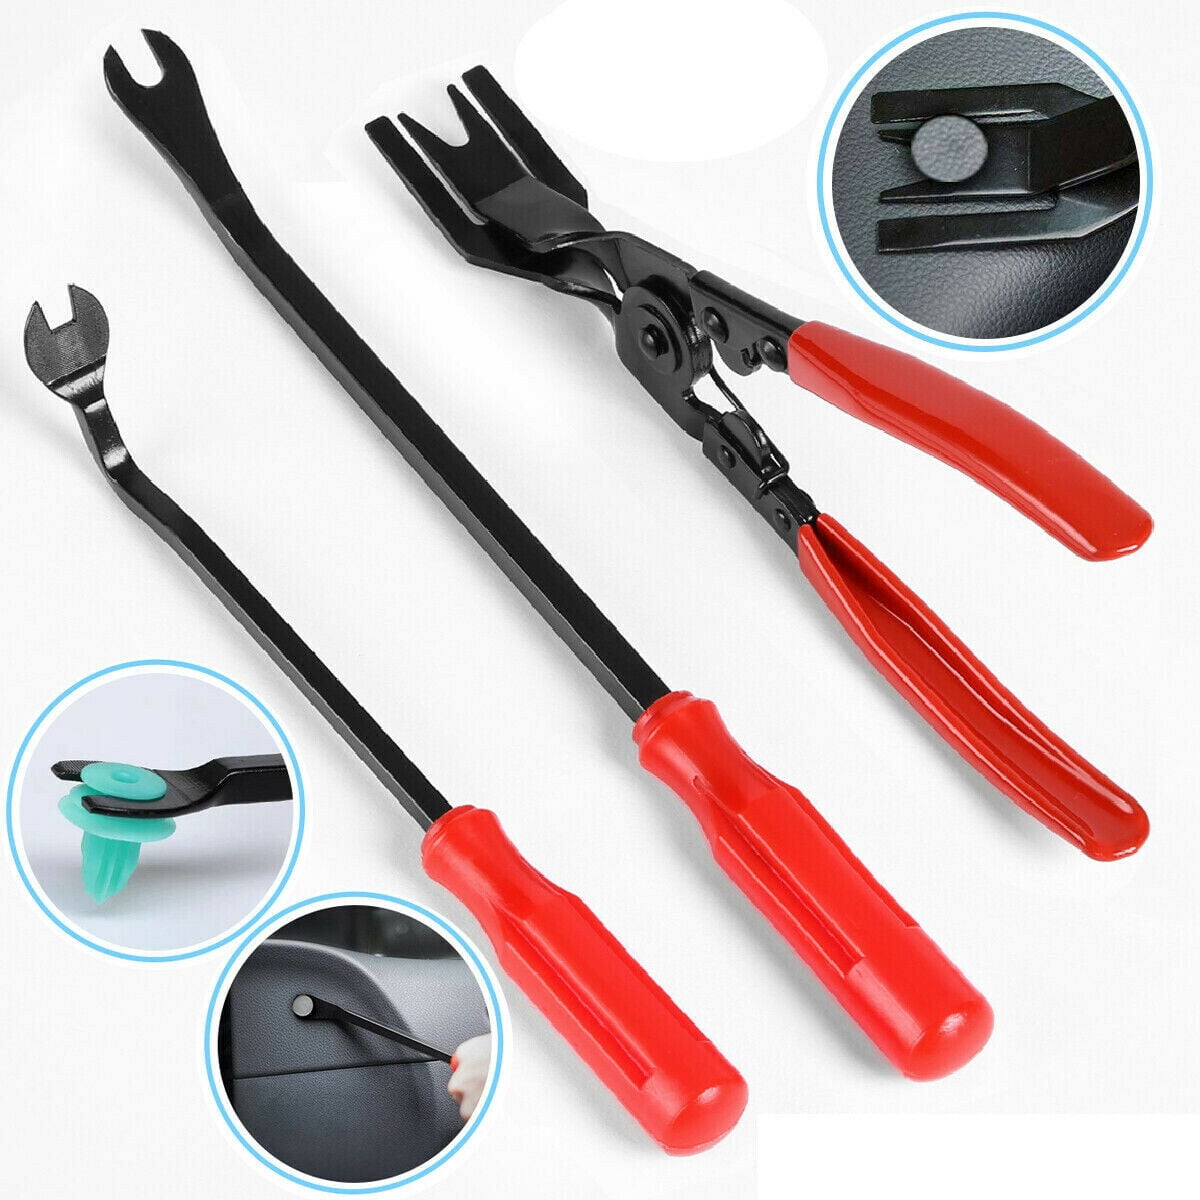 4x Car Door Panel Trim Clip Removal Plier & Upholstery Remover Pry Bar Tool Set 